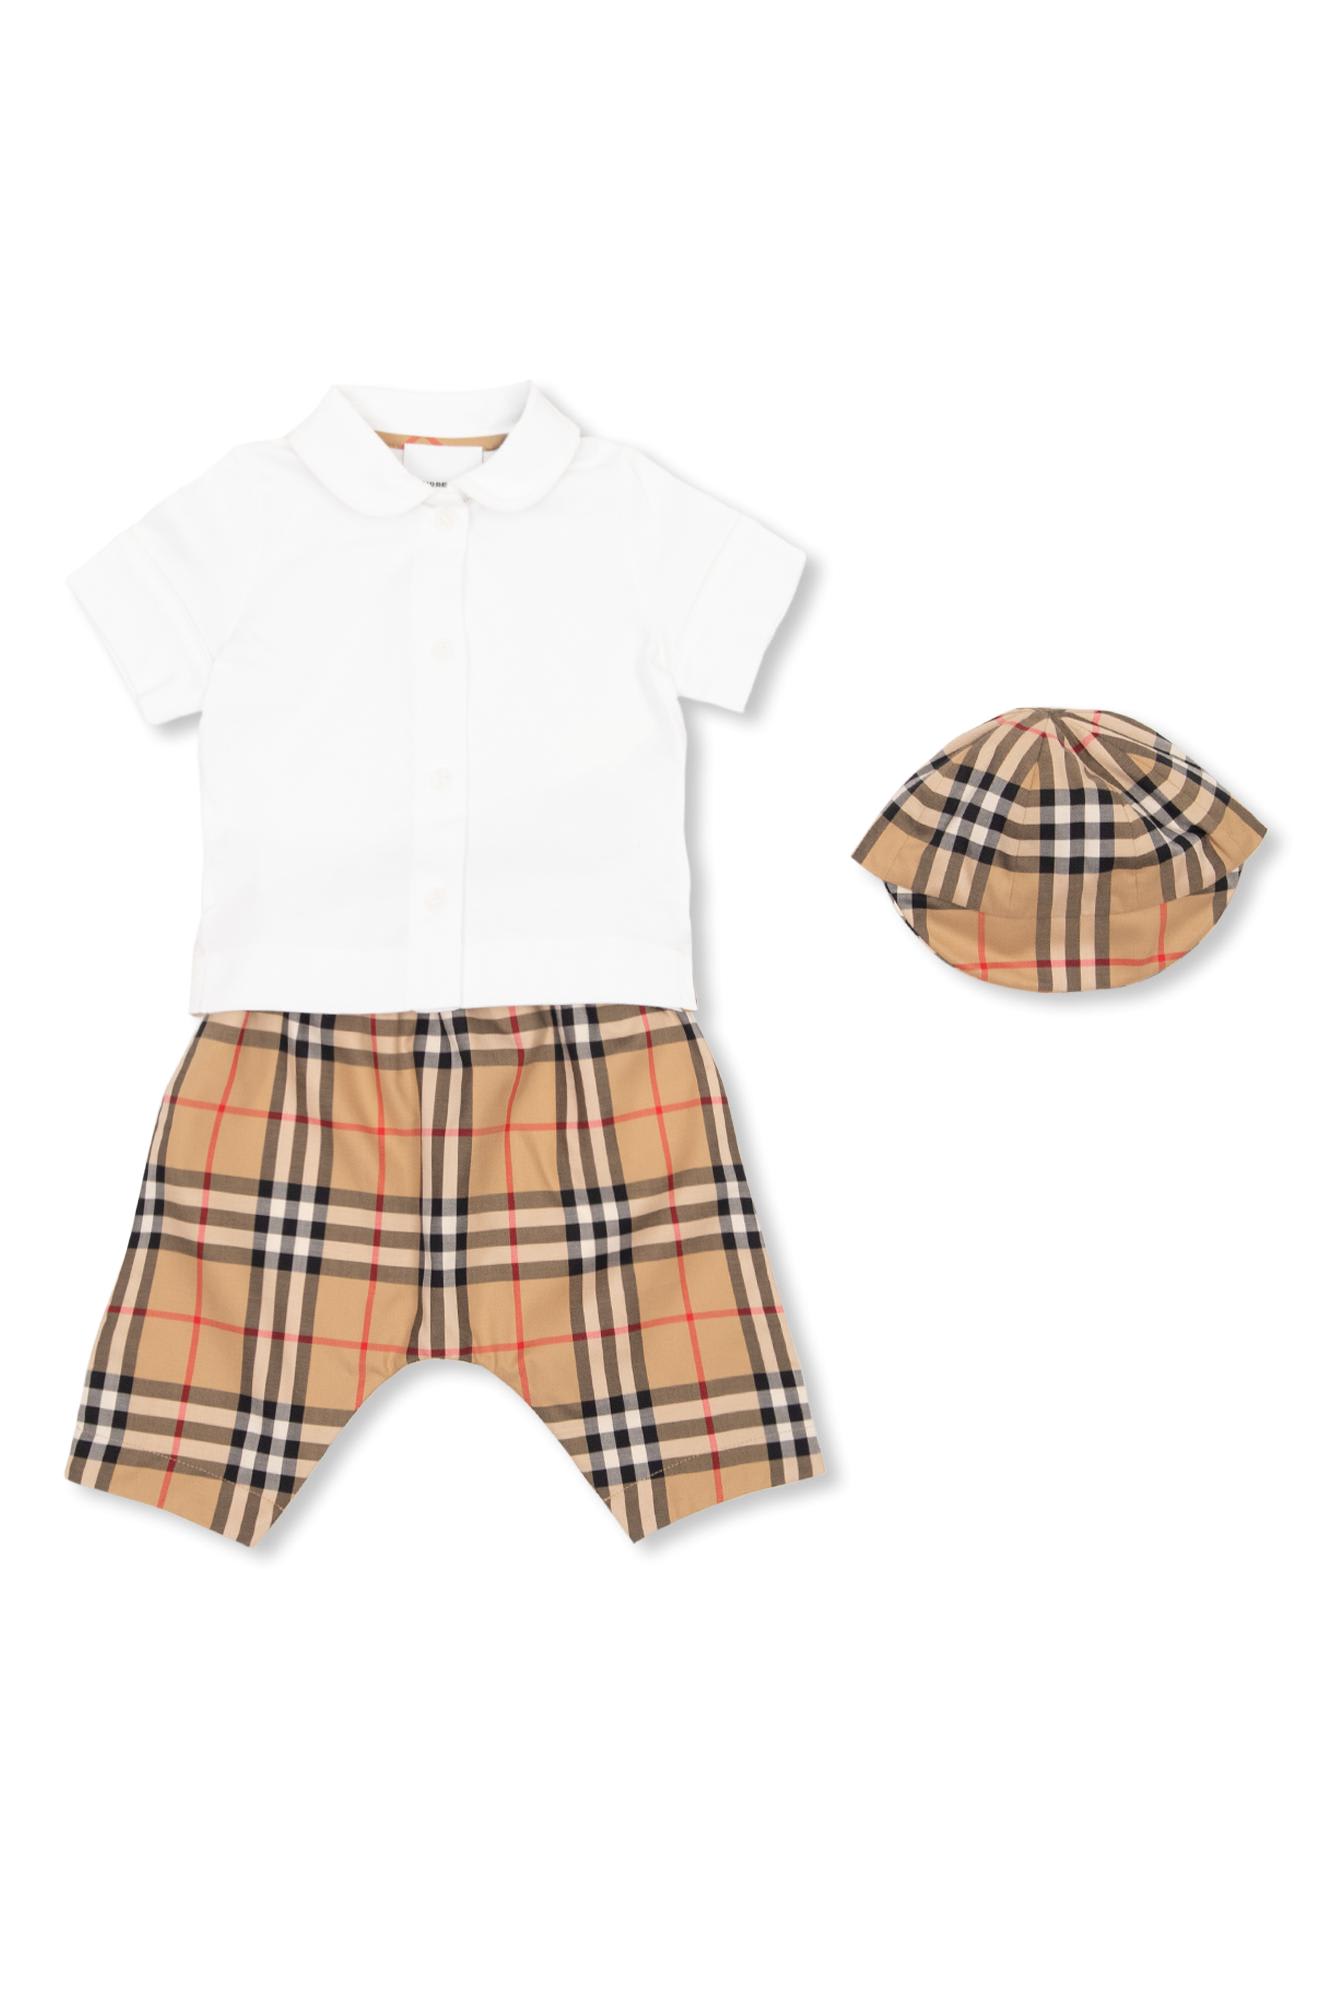 Burberry Babies' Shirt, Trousers & Baseball Cap Set In Archive Beige